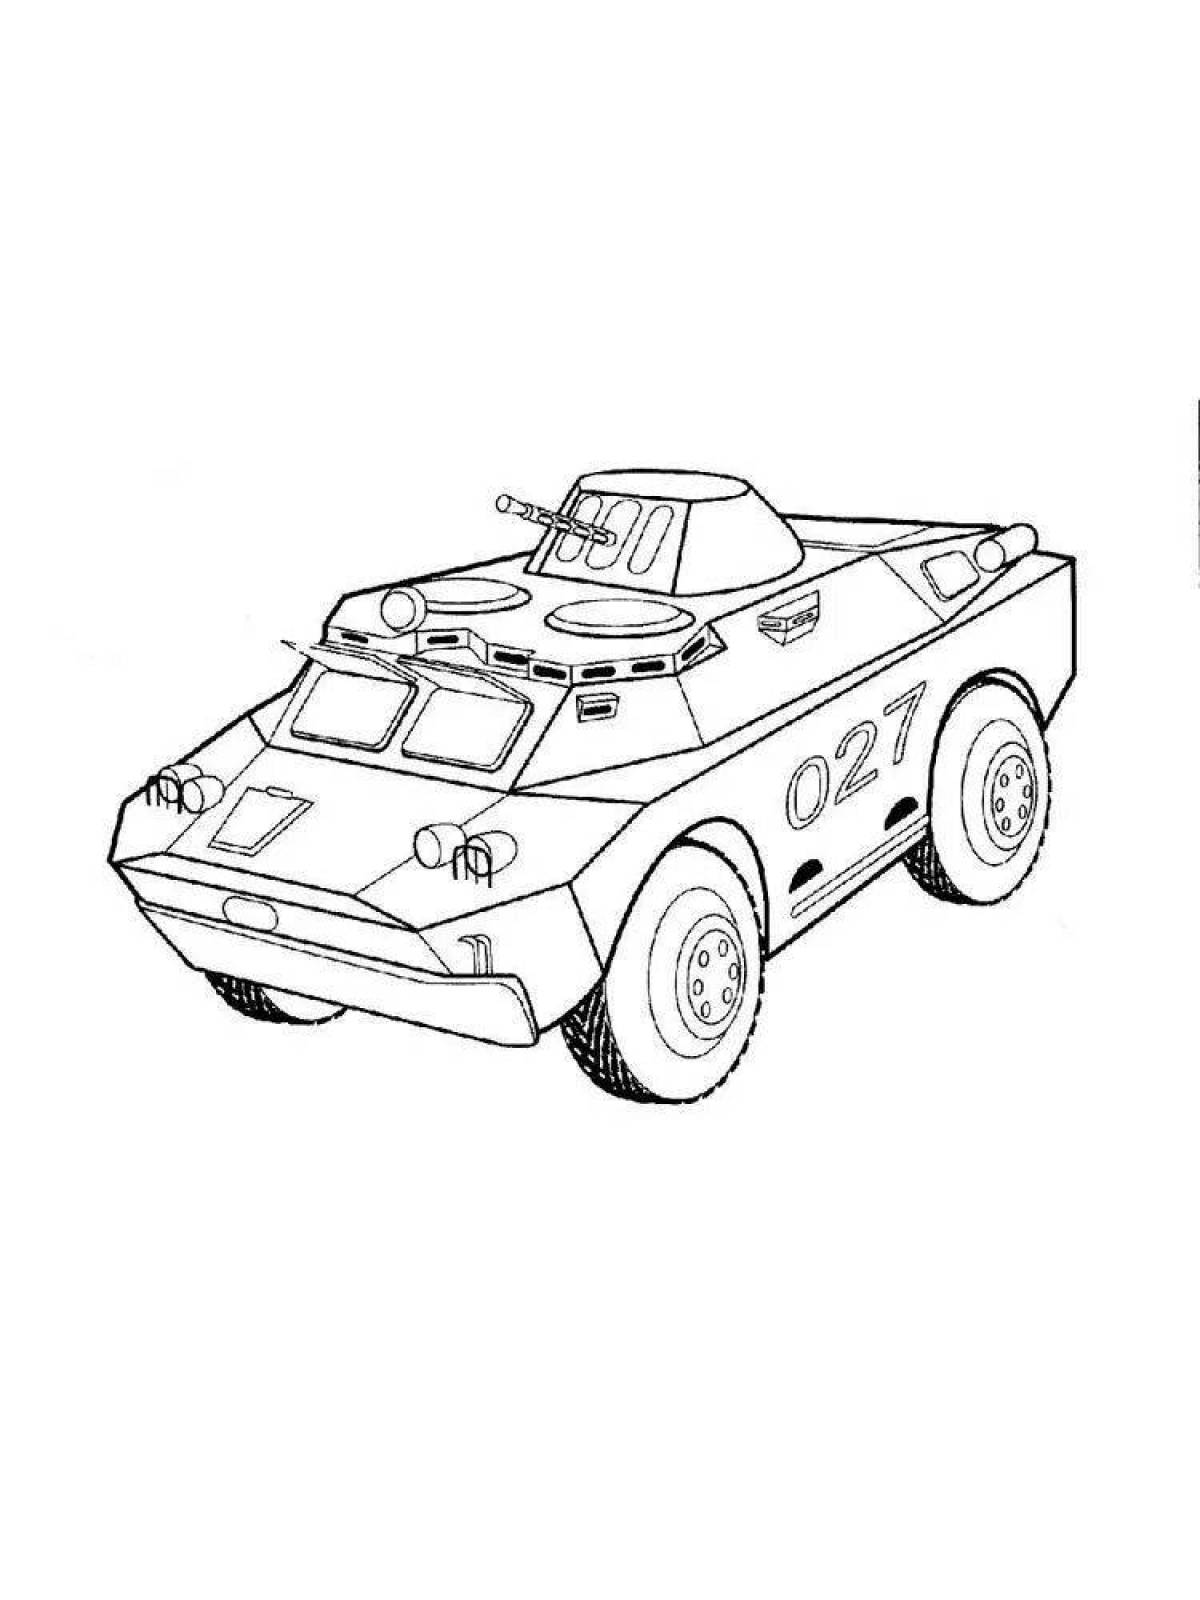 Colouring armored personnel carrier resplendent